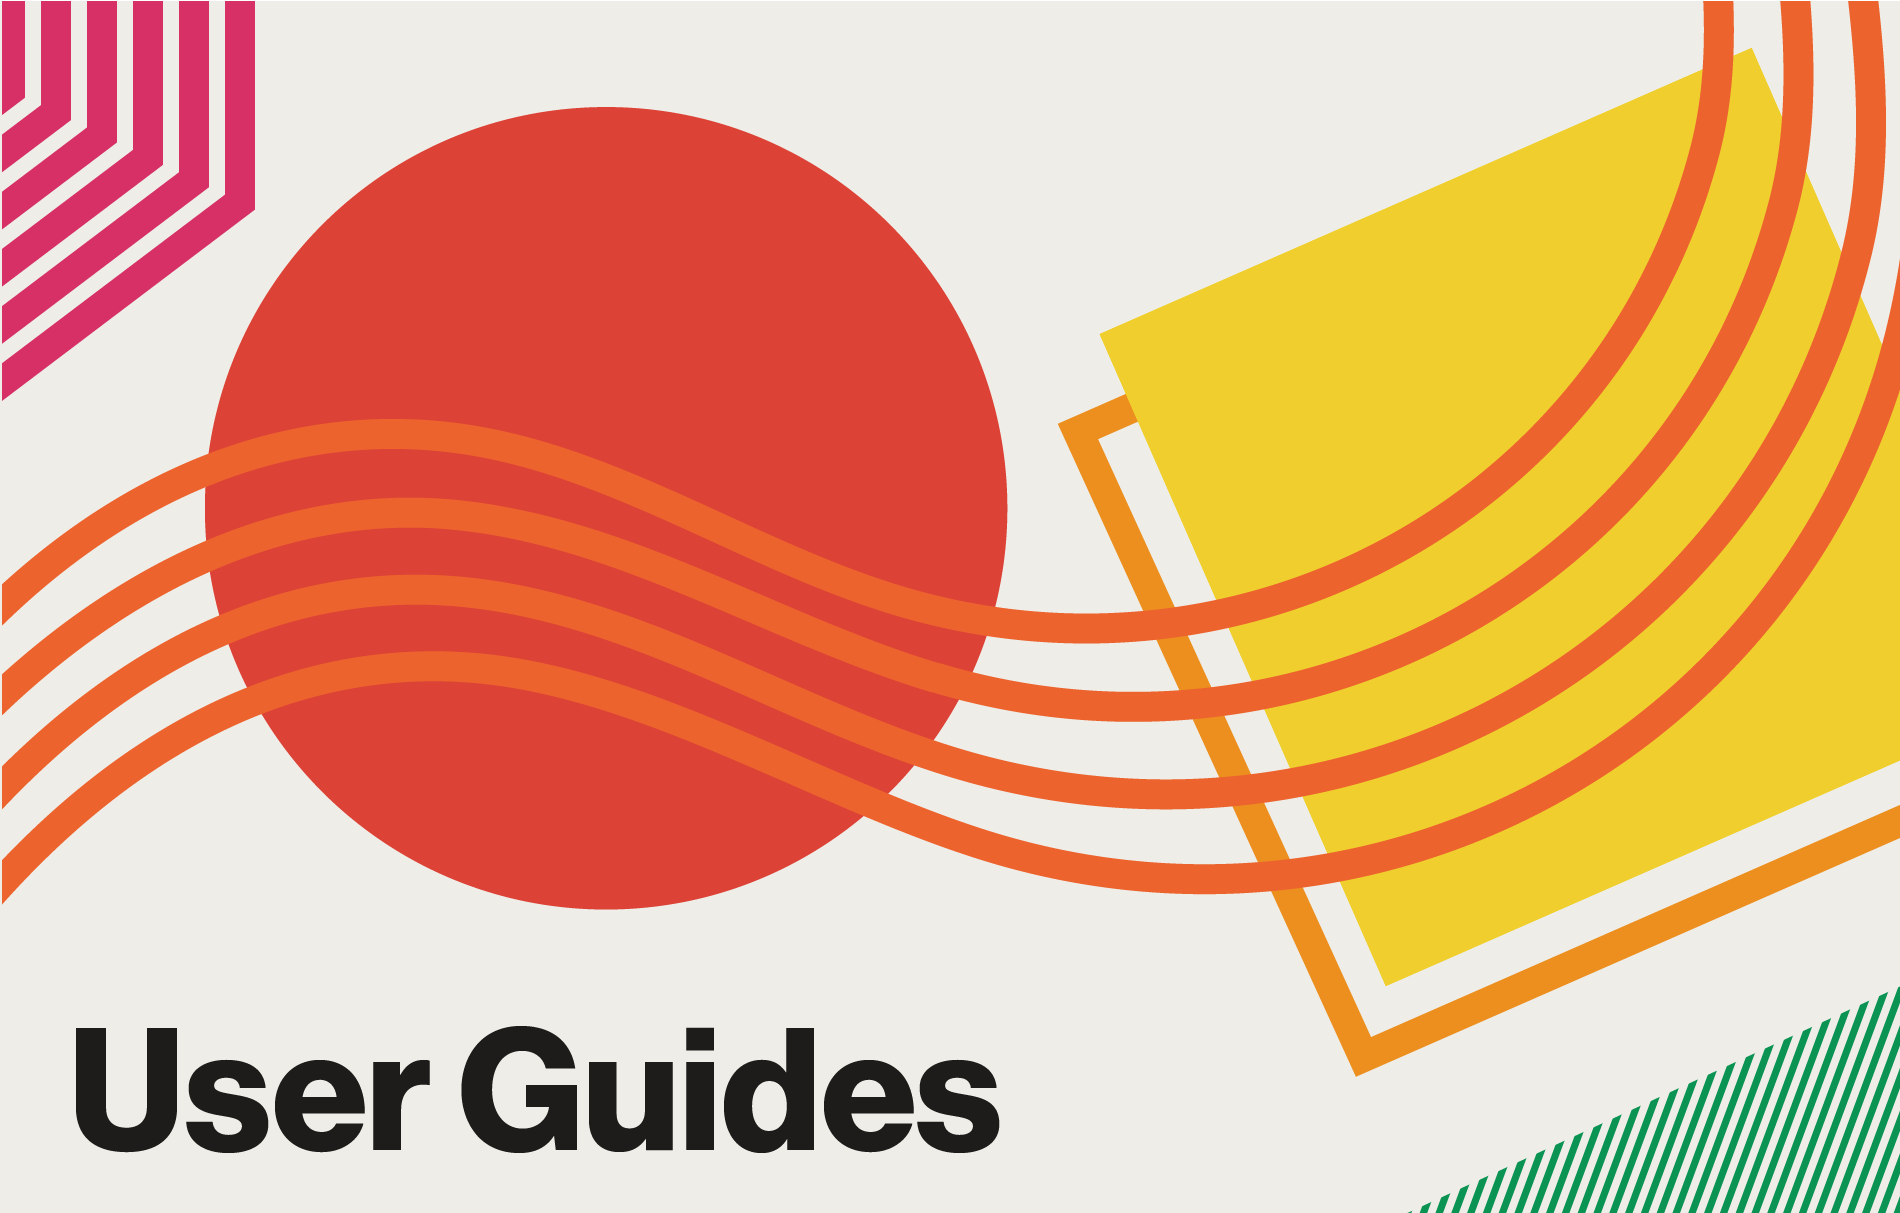 Clickable graphic for User Guides